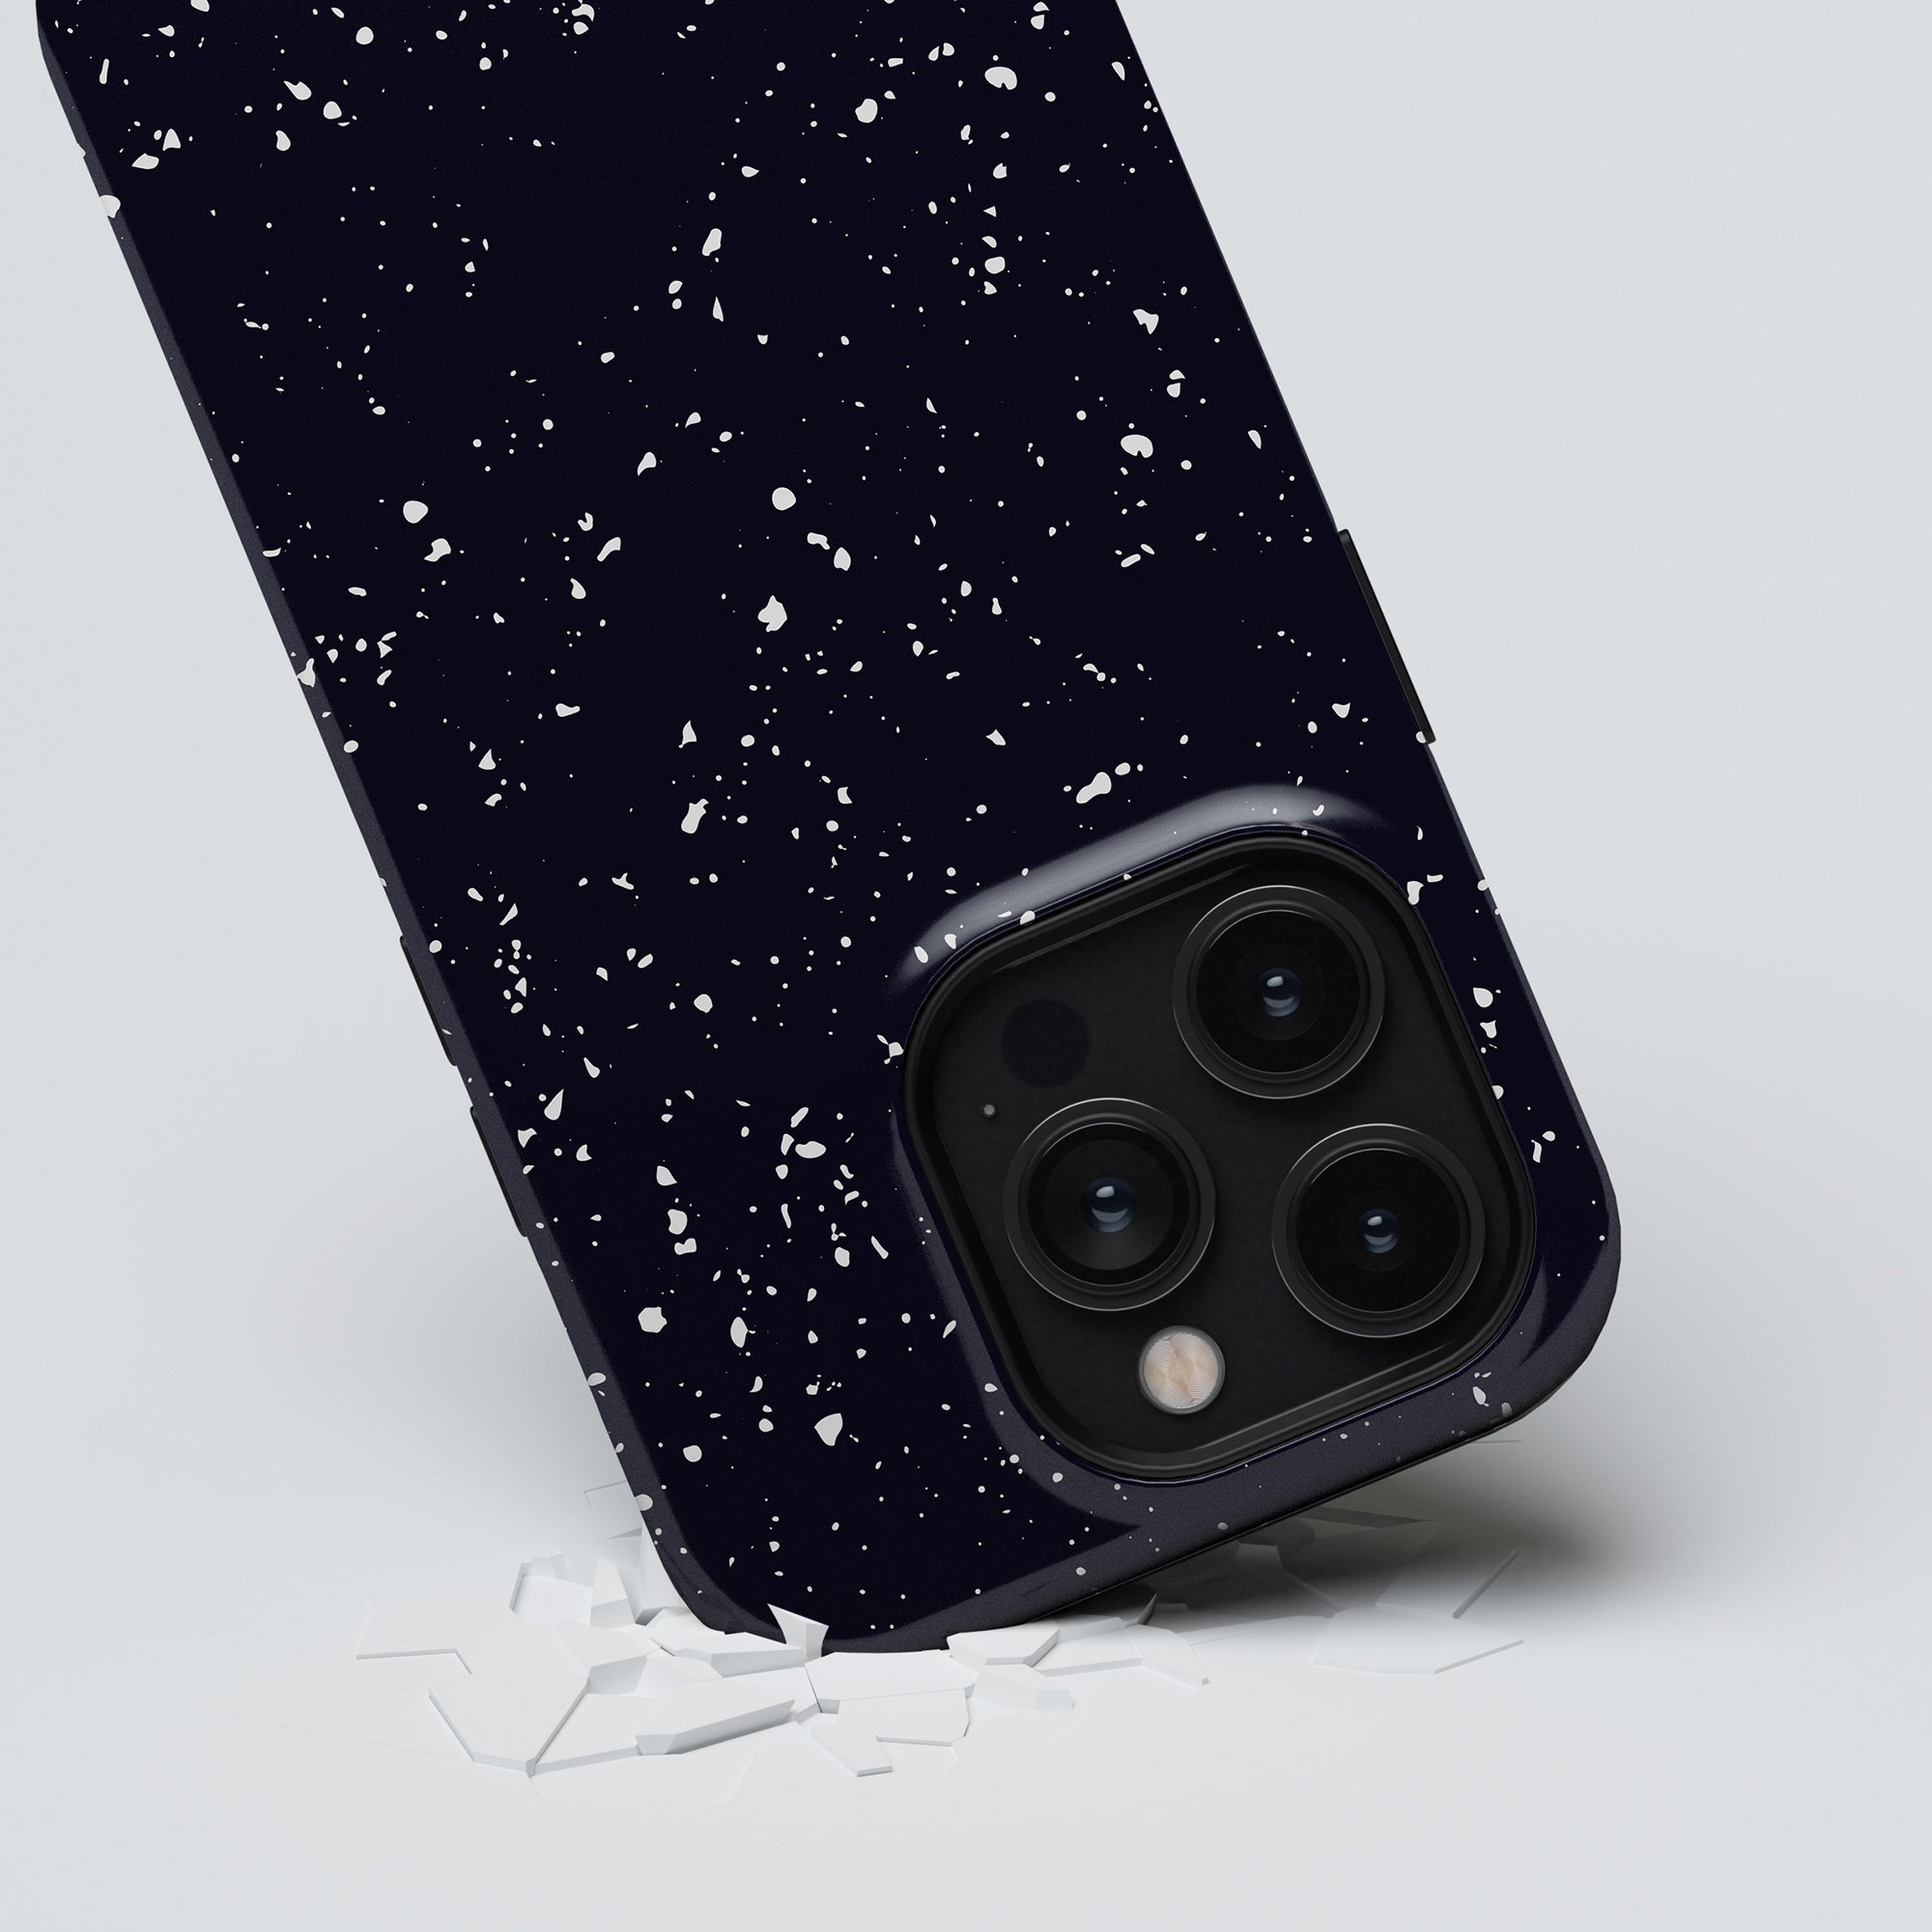 Smartphone with a navy blue back cover adorned with Night Stars - Tough Case, shattering the surface beneath with its impact.